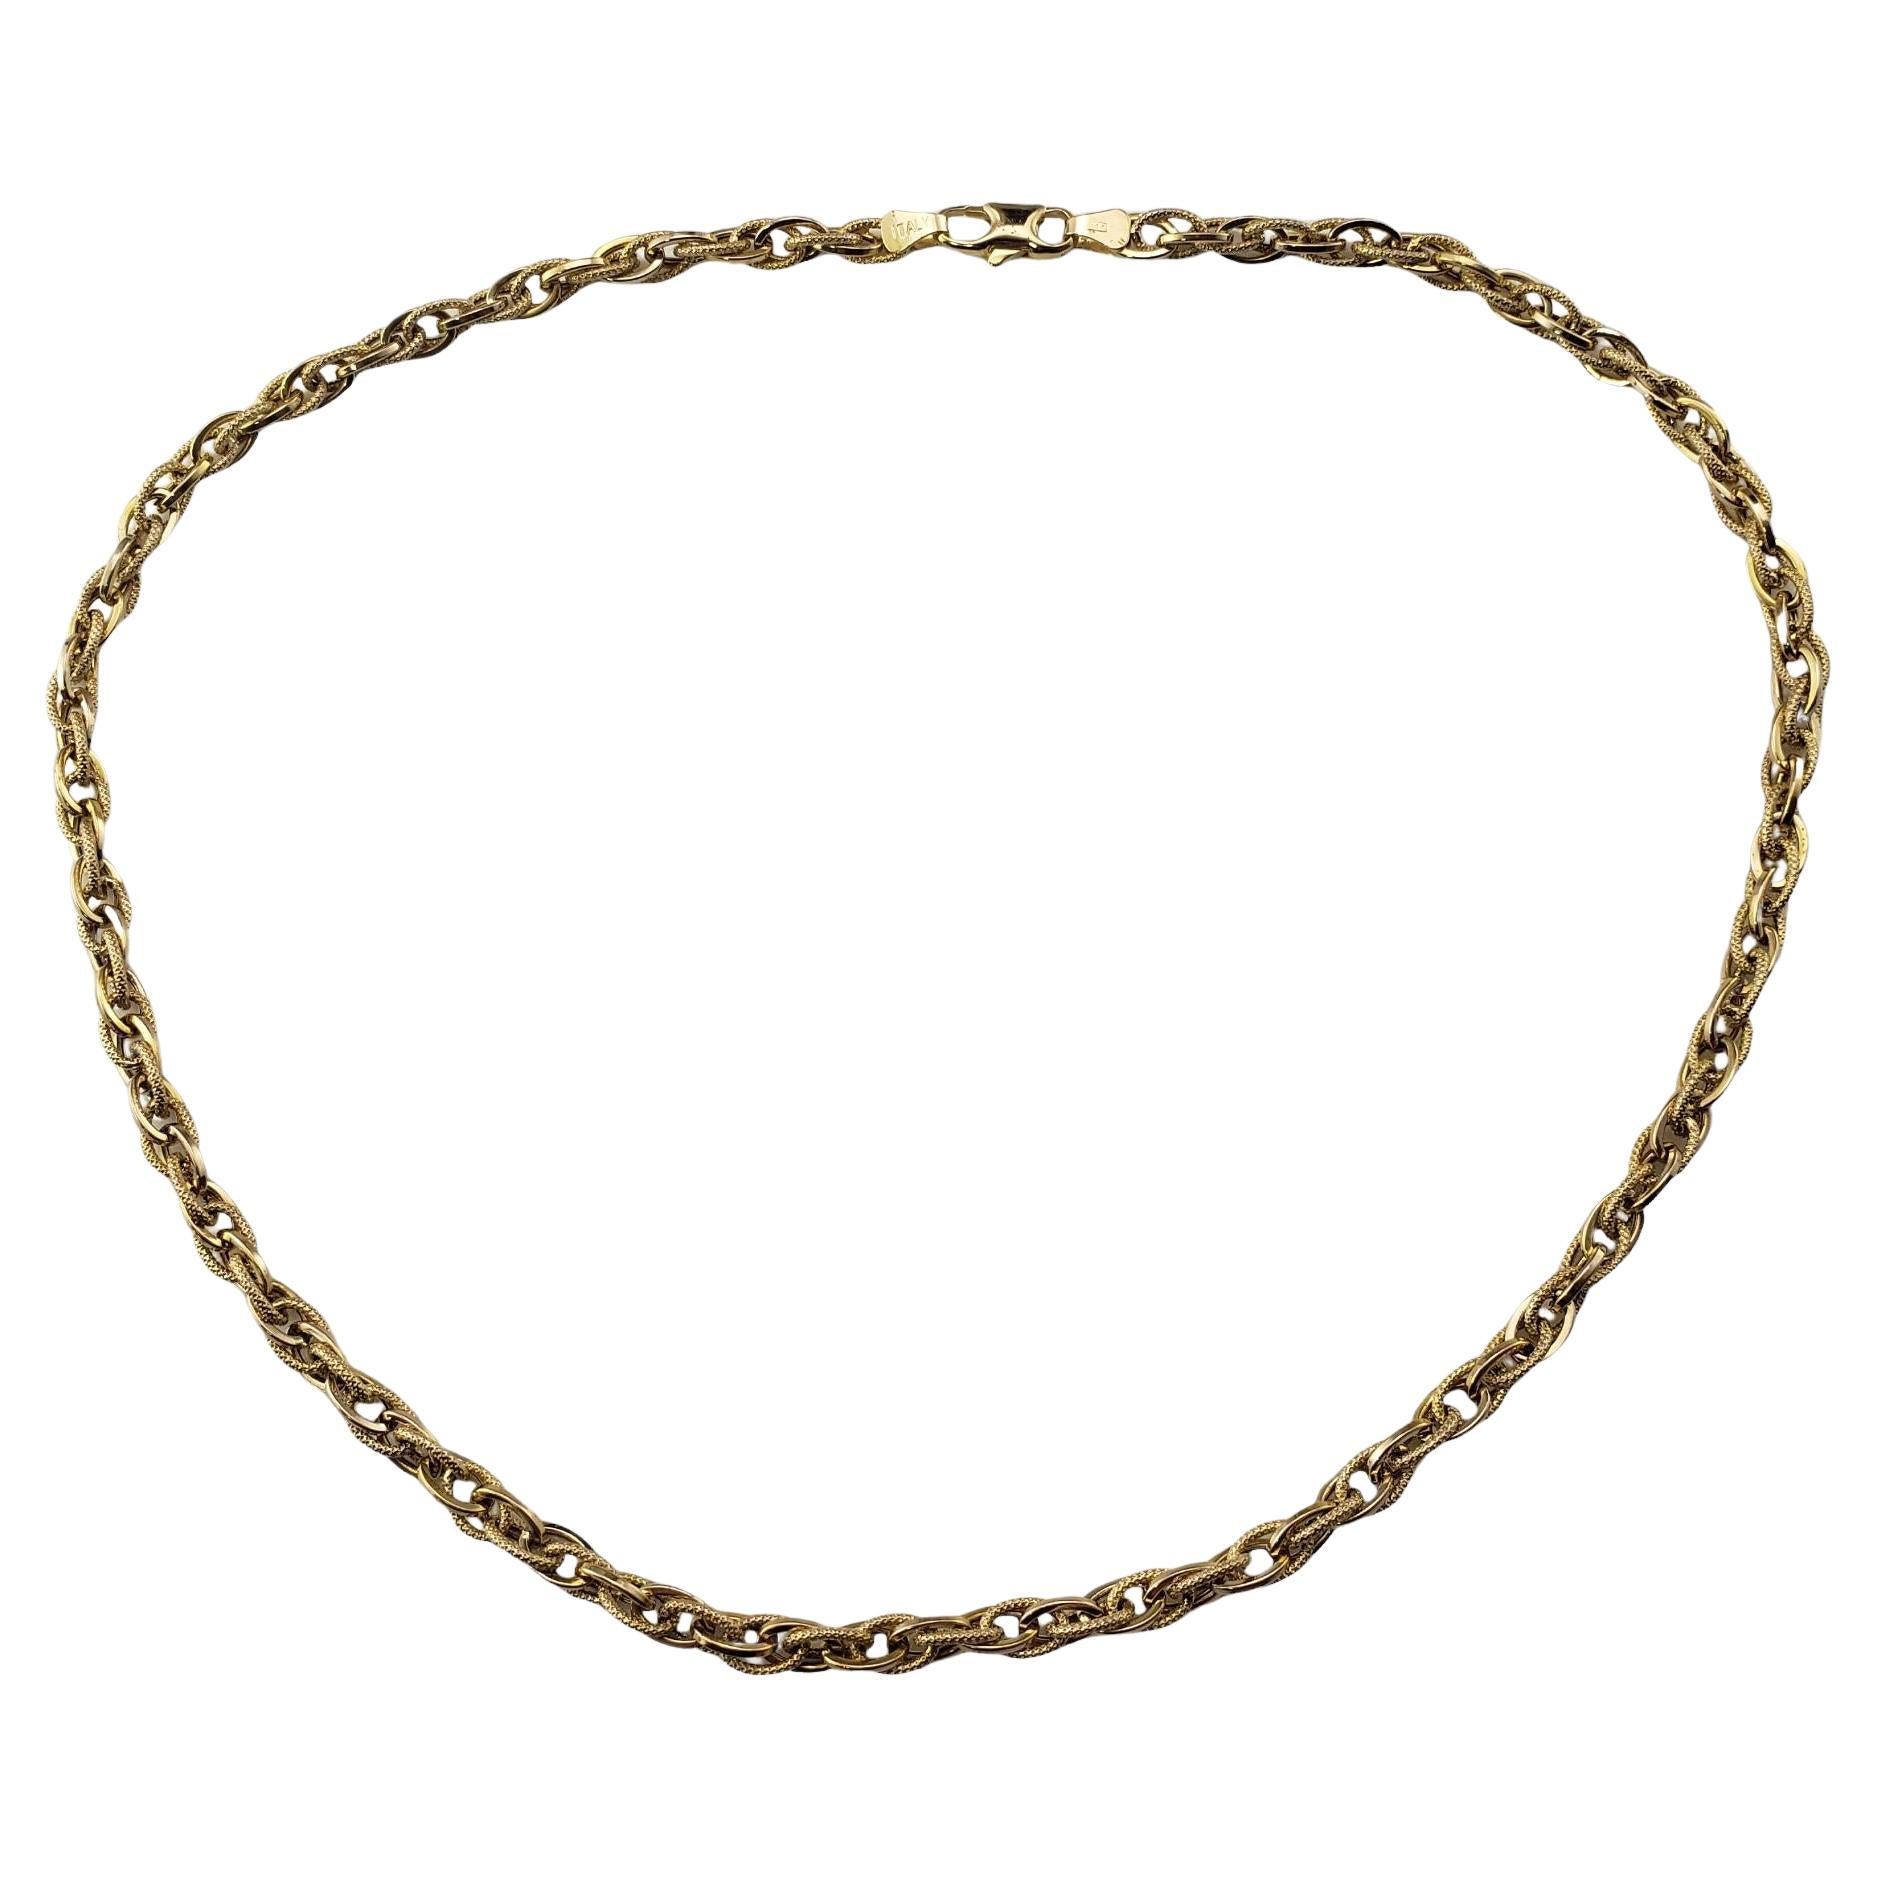  14 Karat Yellow Gold Cable Chain Necklace #15528